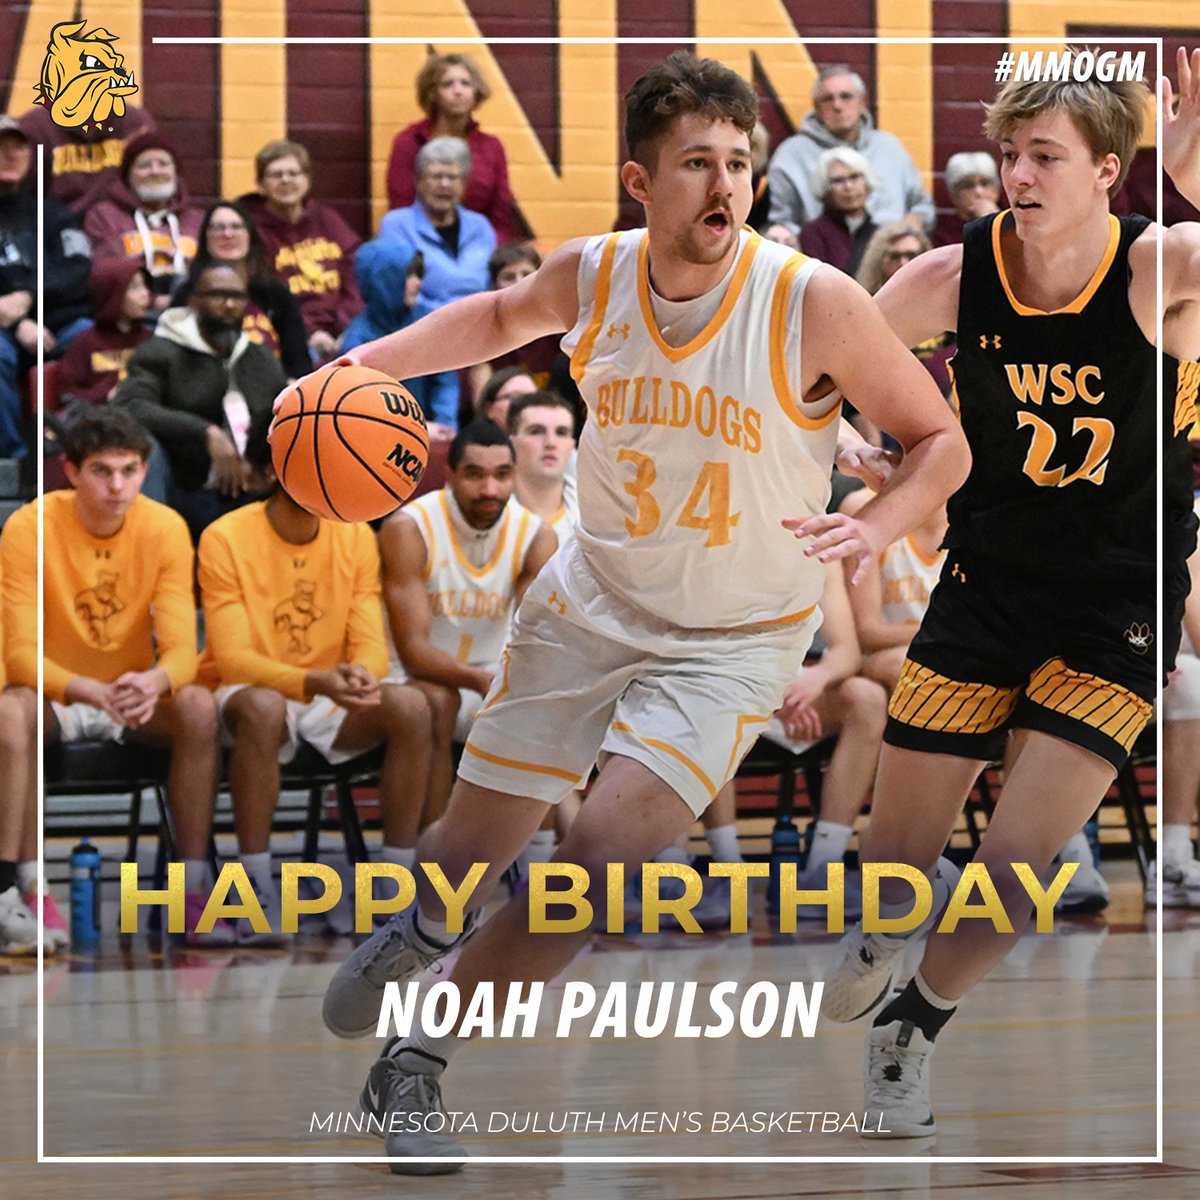 Happy Birthday to our guy, 𝗡𝗼𝗮𝗵 𝗣𝗮𝘂𝗹𝘀𝗼𝗻❗ We hope you have a great day, 𝟯𝟰! 🎉 #MakeMoves x #BulldogCountry 🐶🏀